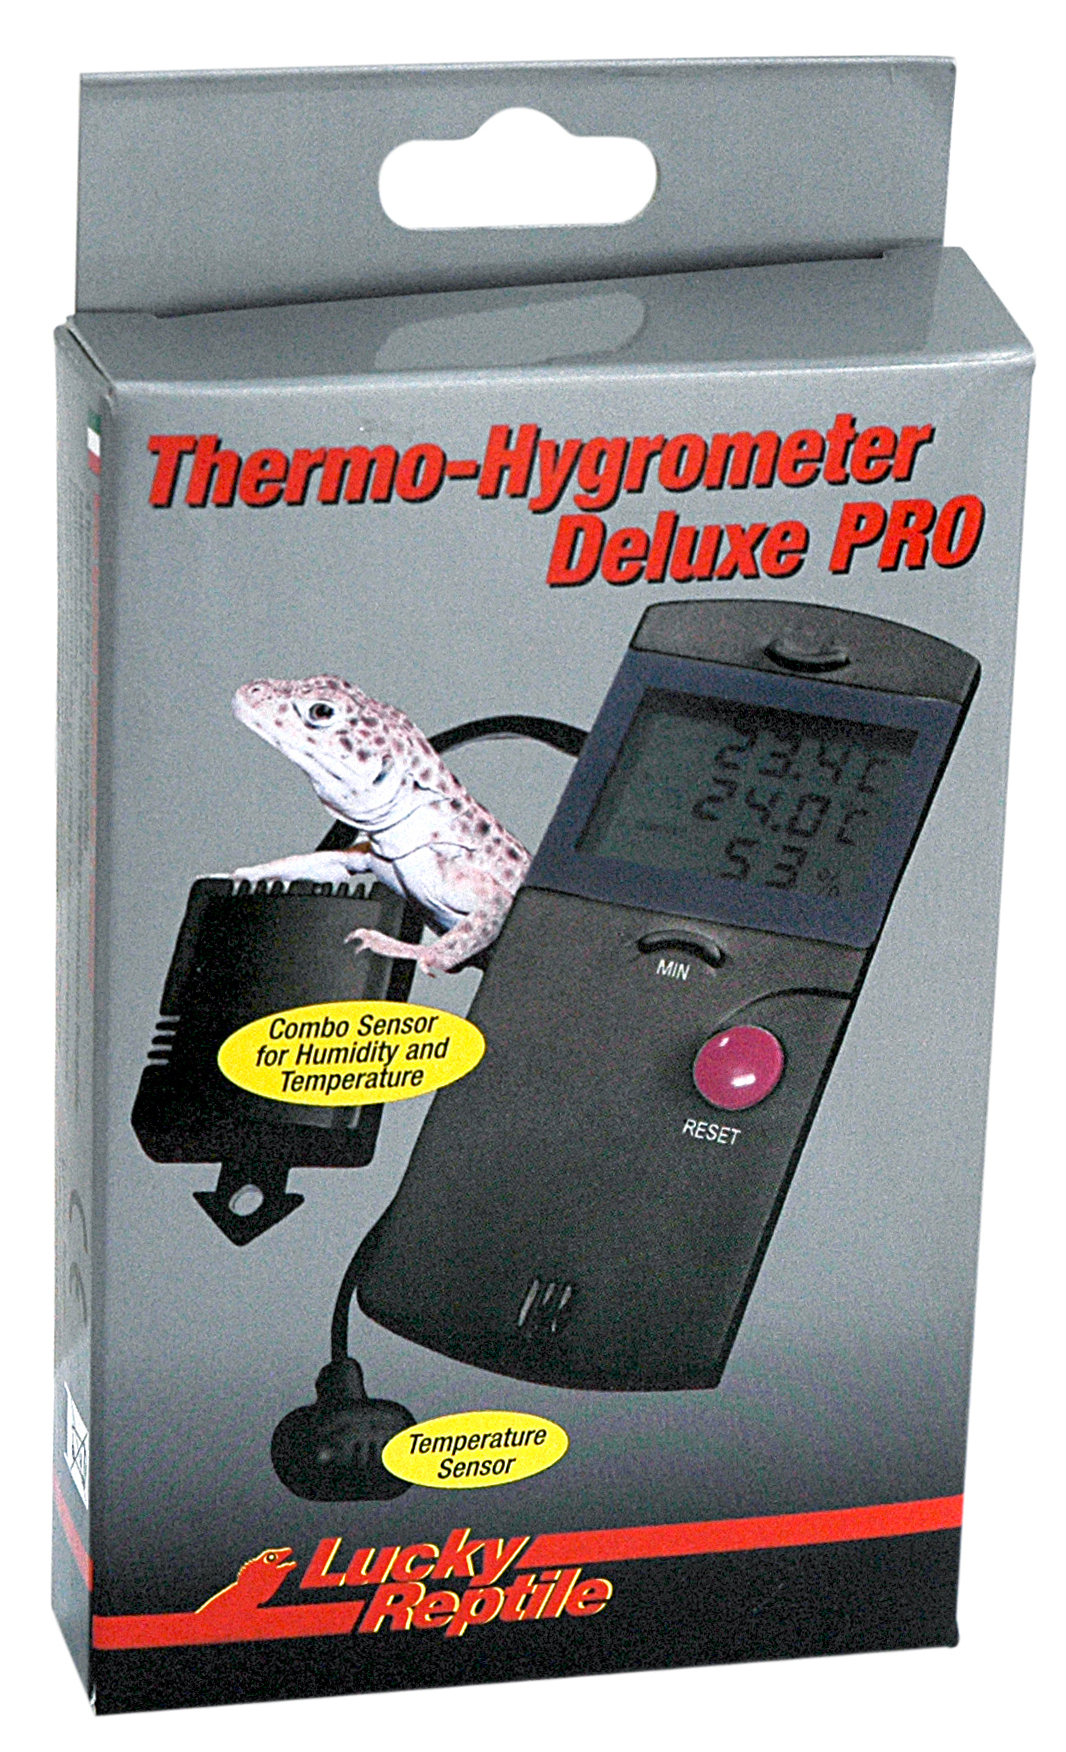 Import-Export Peter Hoch GmbH Thermometer-Hygrometer Deluxe PRO